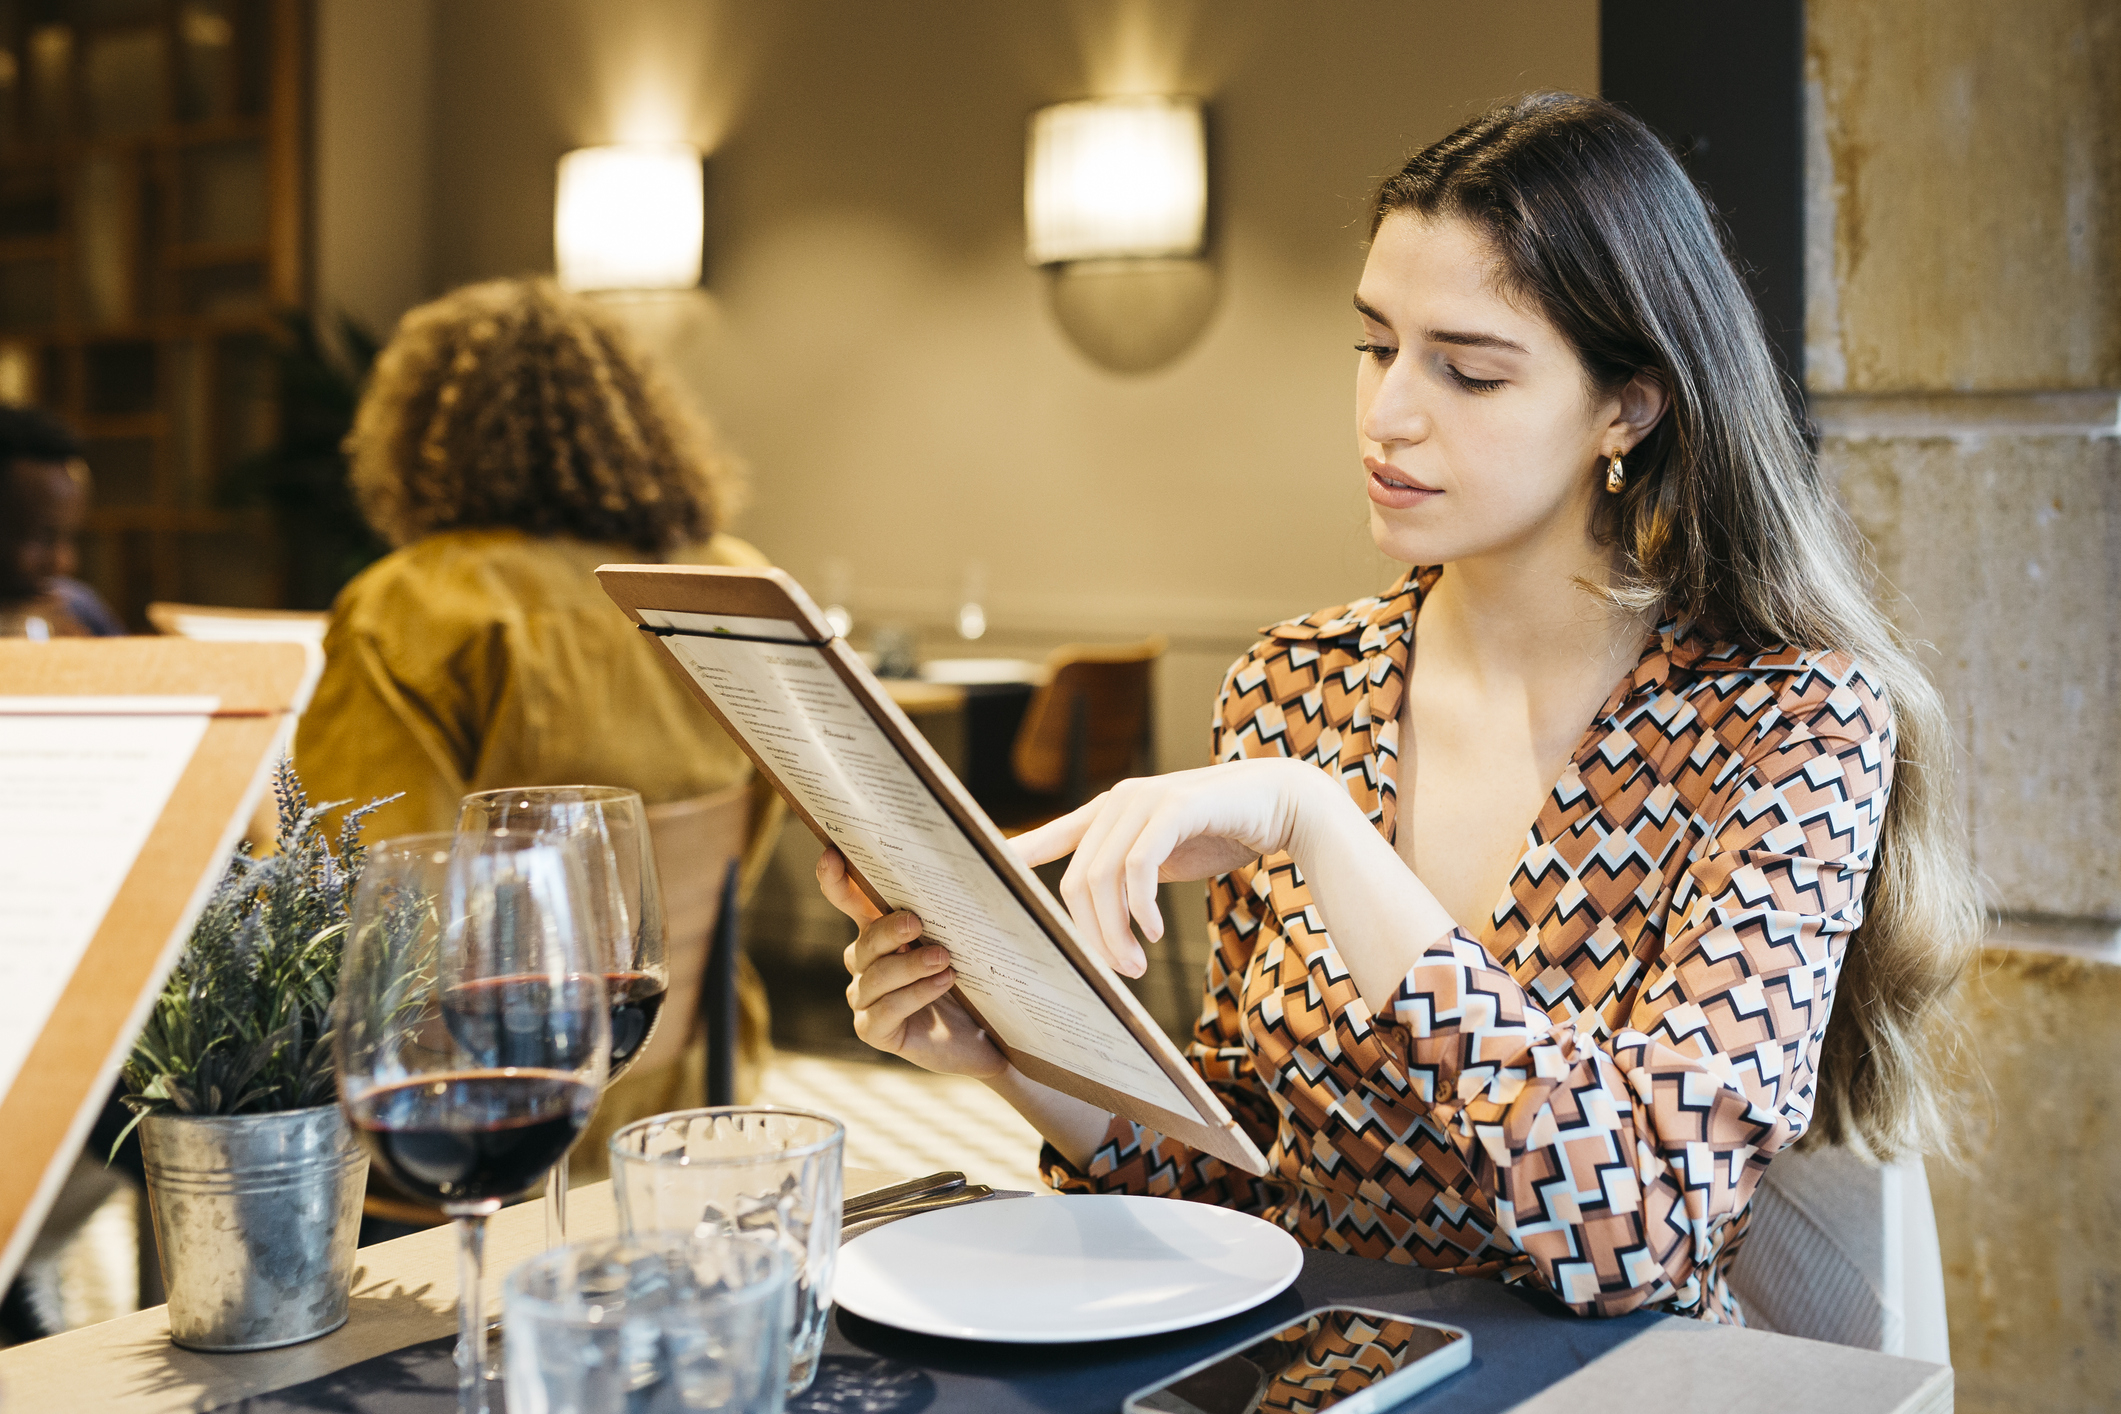 Young women sitting on a restaurant table and reading the menu